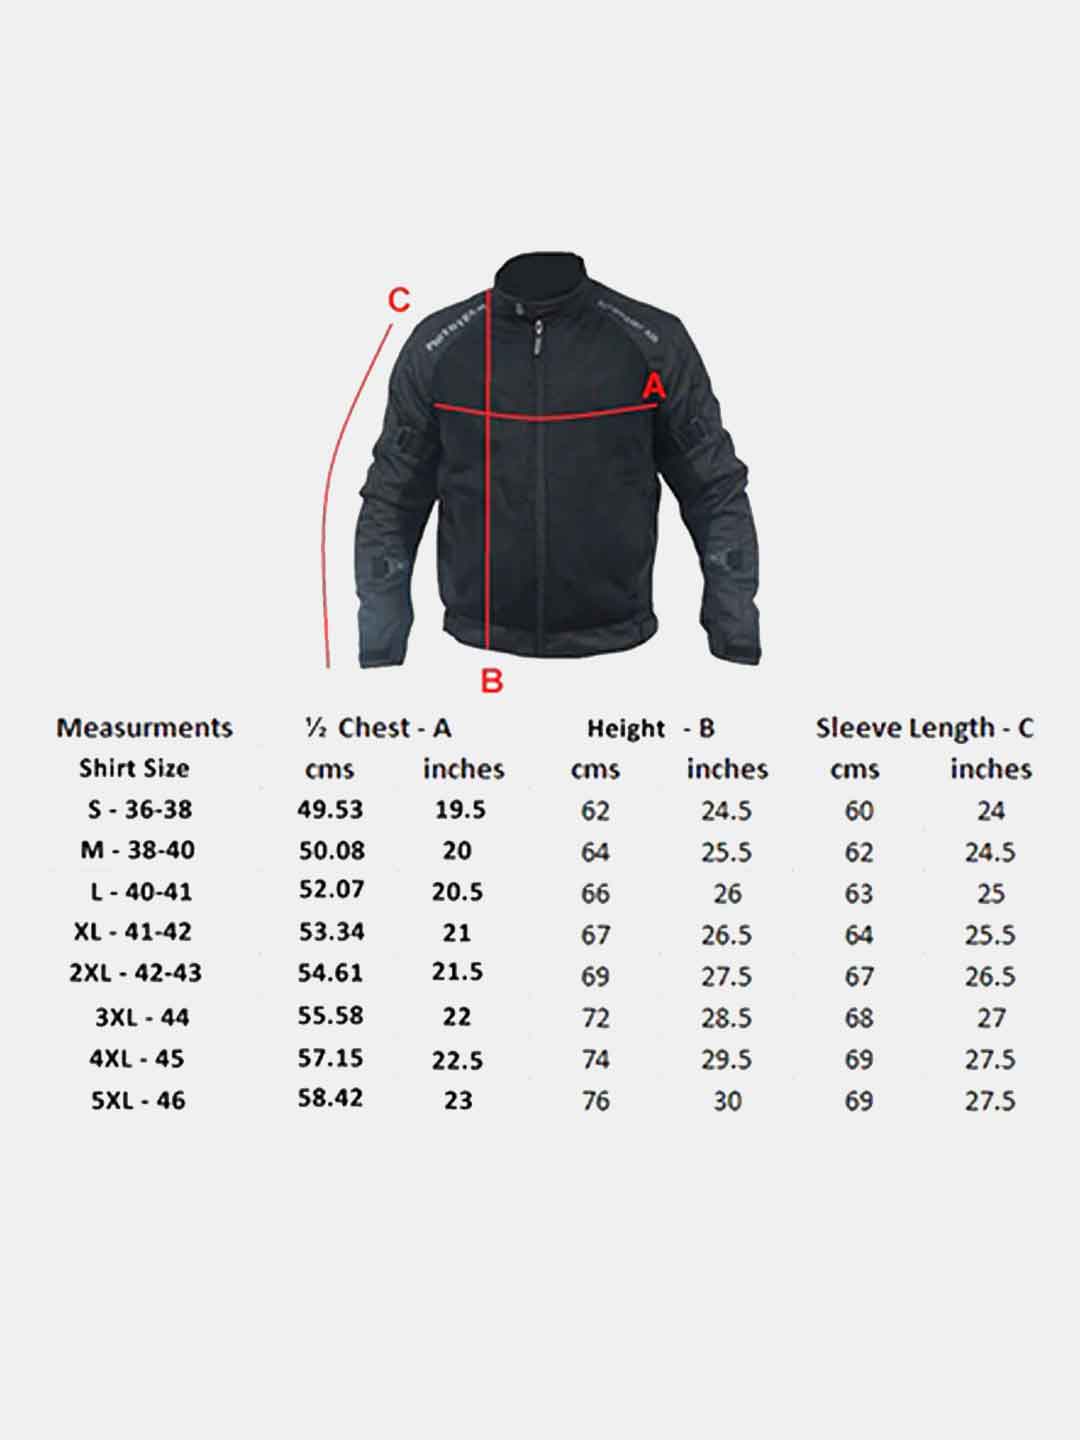 Royal Enfield Streetwind Eco 'sustainable' riding jacket launched: Priced  at Rs 5,950 - Bike News | The Financial Express